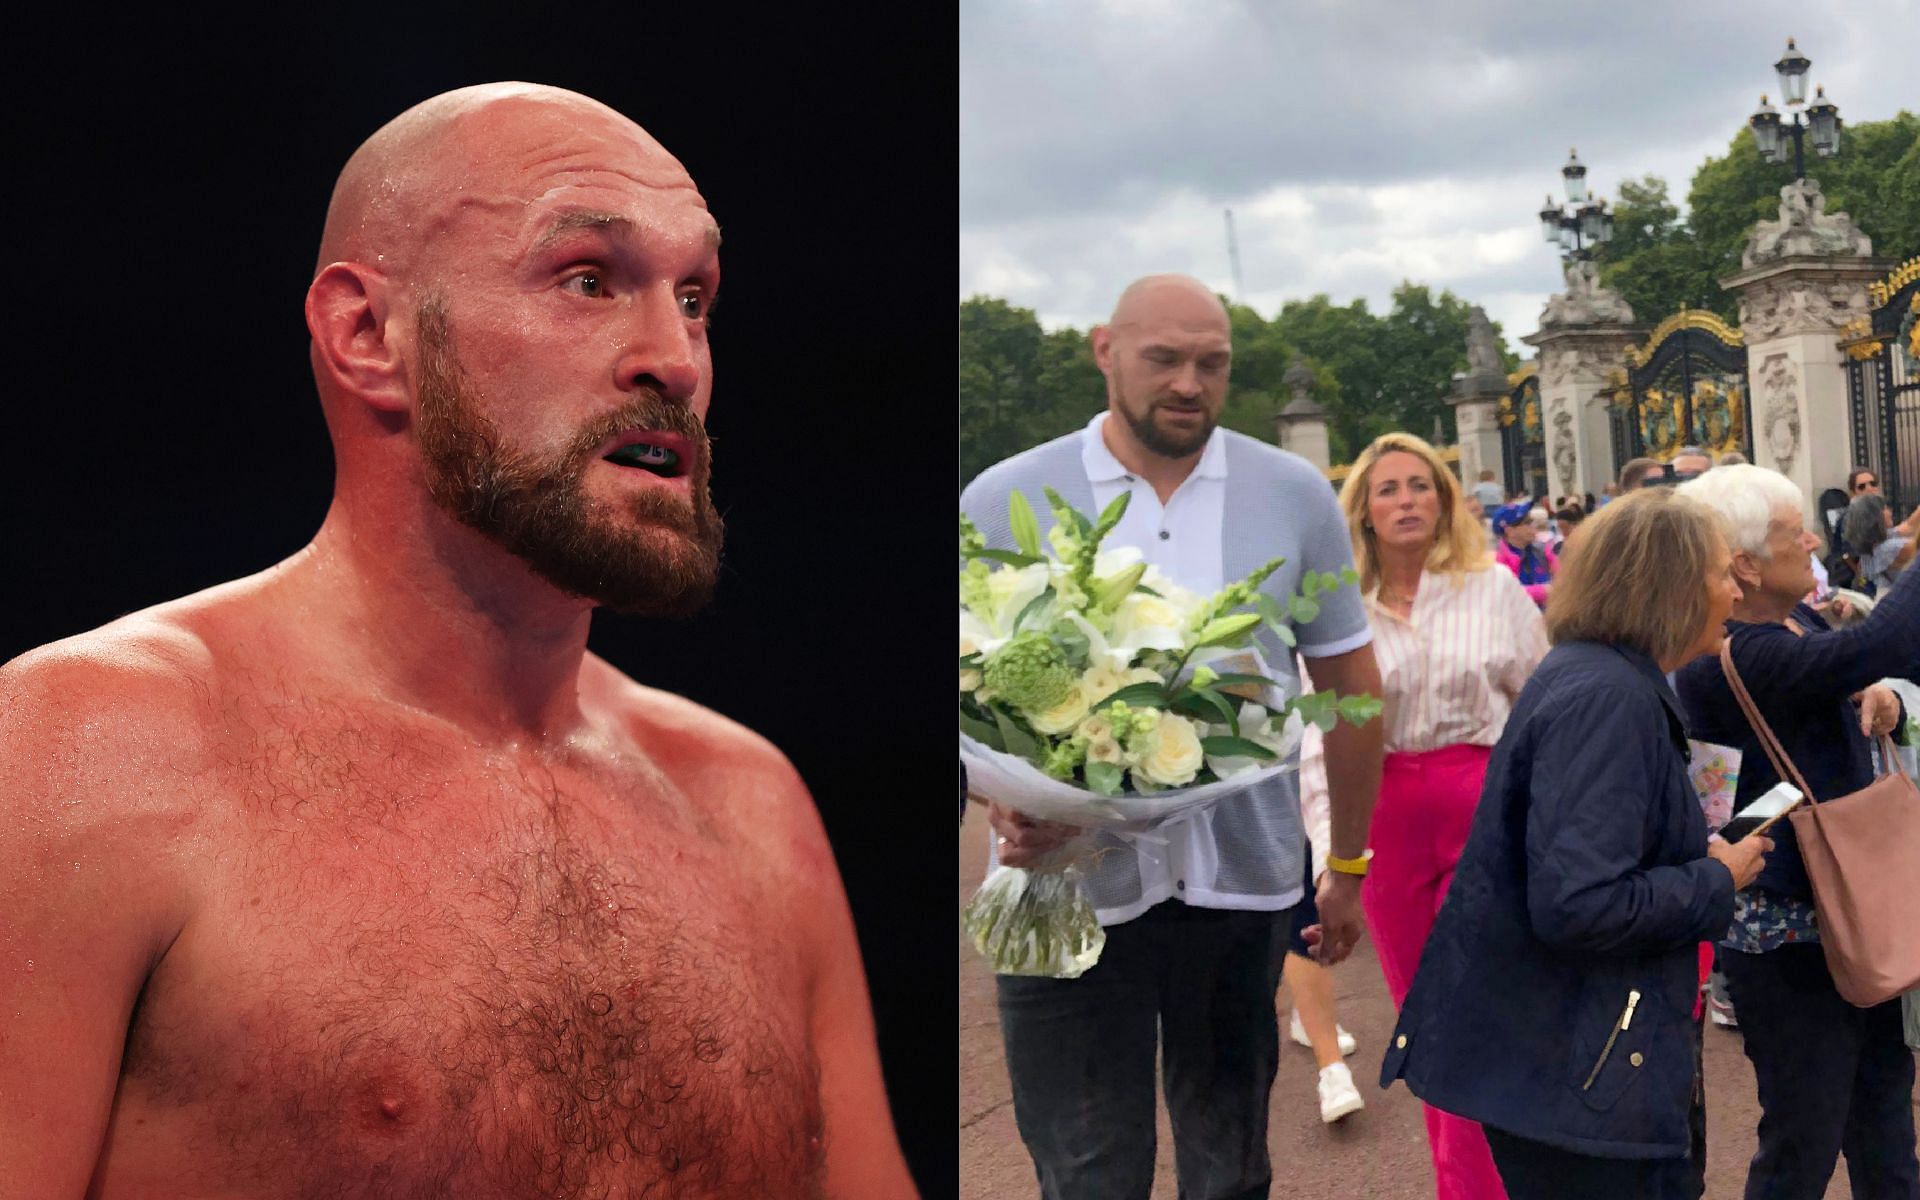 Tyson Fury (left) and Tyson Fury with Paris Fury at Buckingham Palace (right) (Image credits Getty Images and @michaelbenson on Twitter)